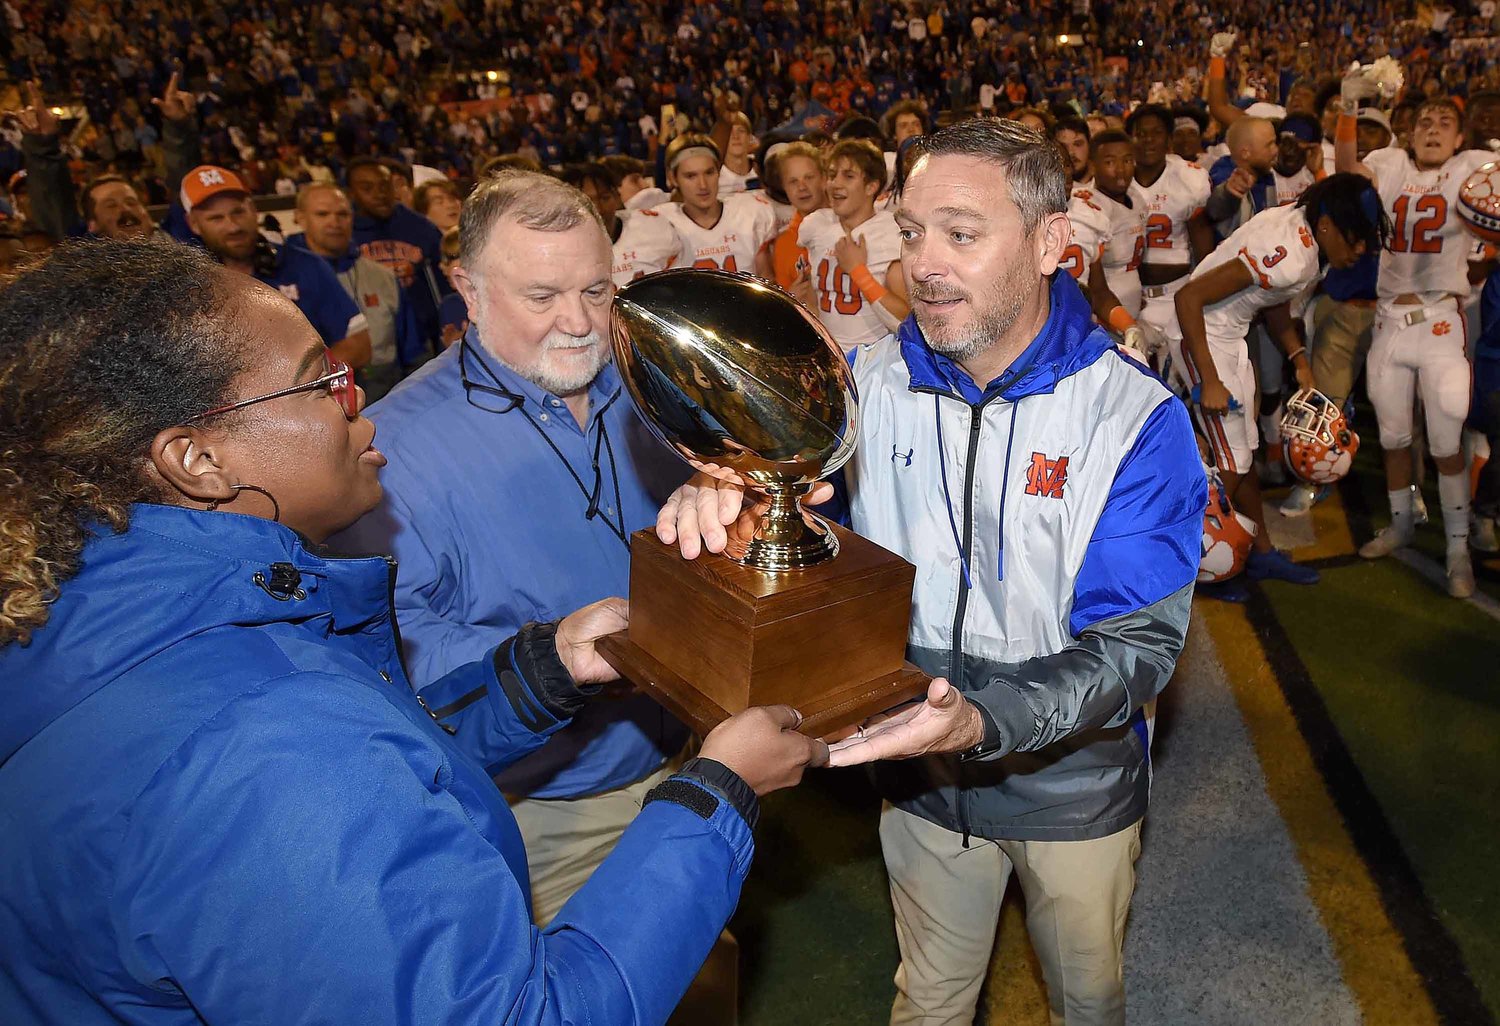 Madison Central head coach Toby Collums receives the trophy after the Jaguars beat Brandon in the MHSAA Class 6A Football State Championship game.